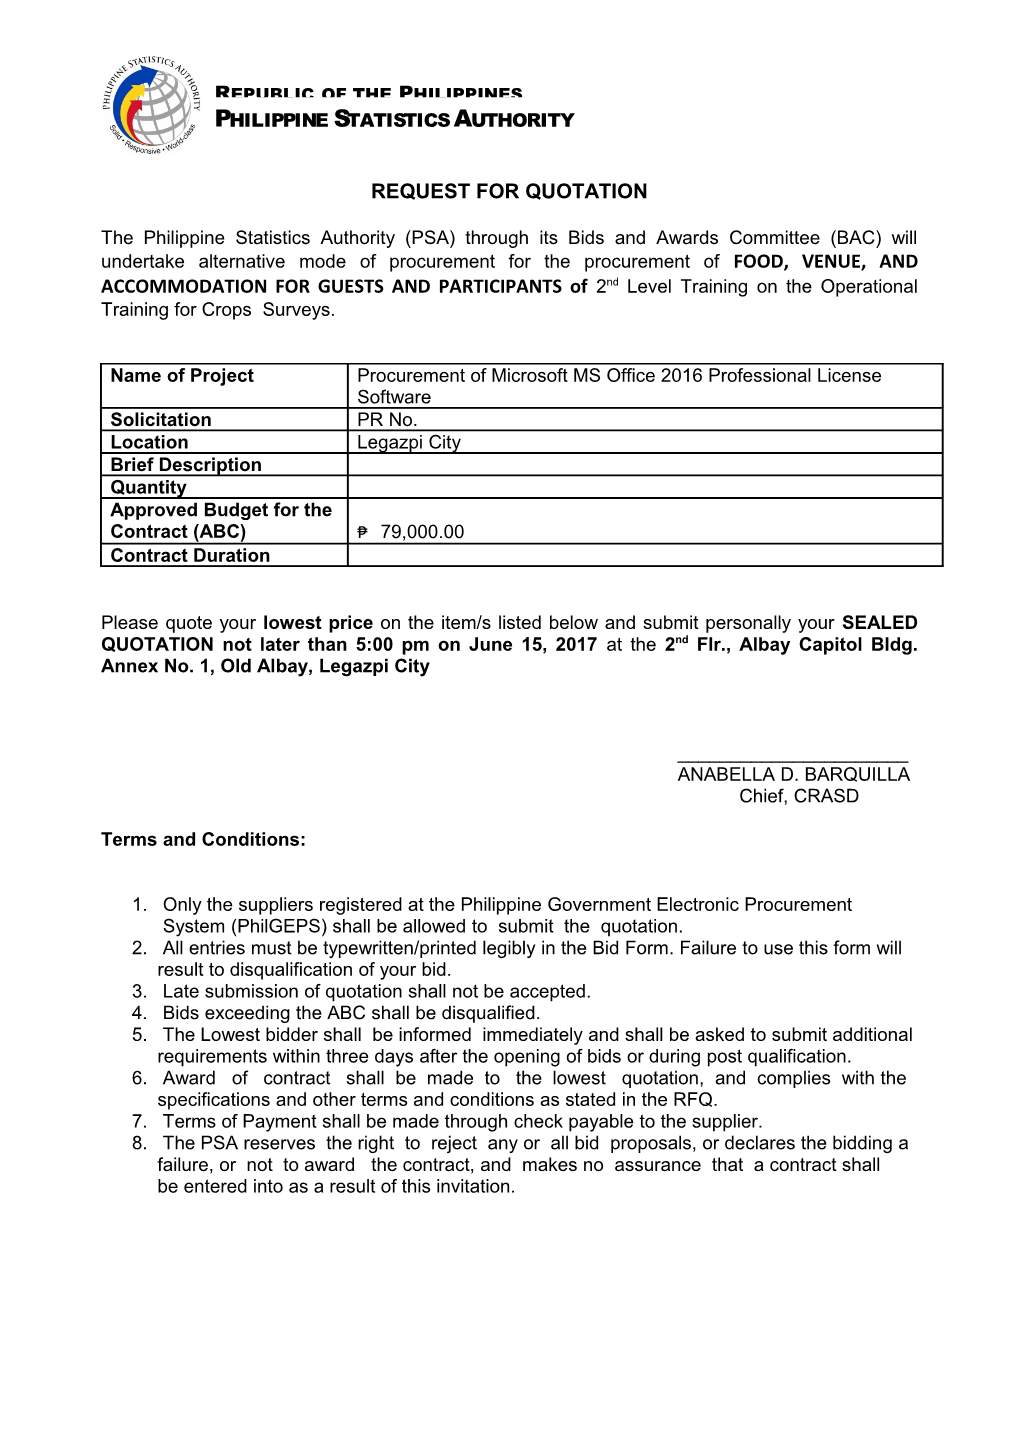 Request for Quotation s26